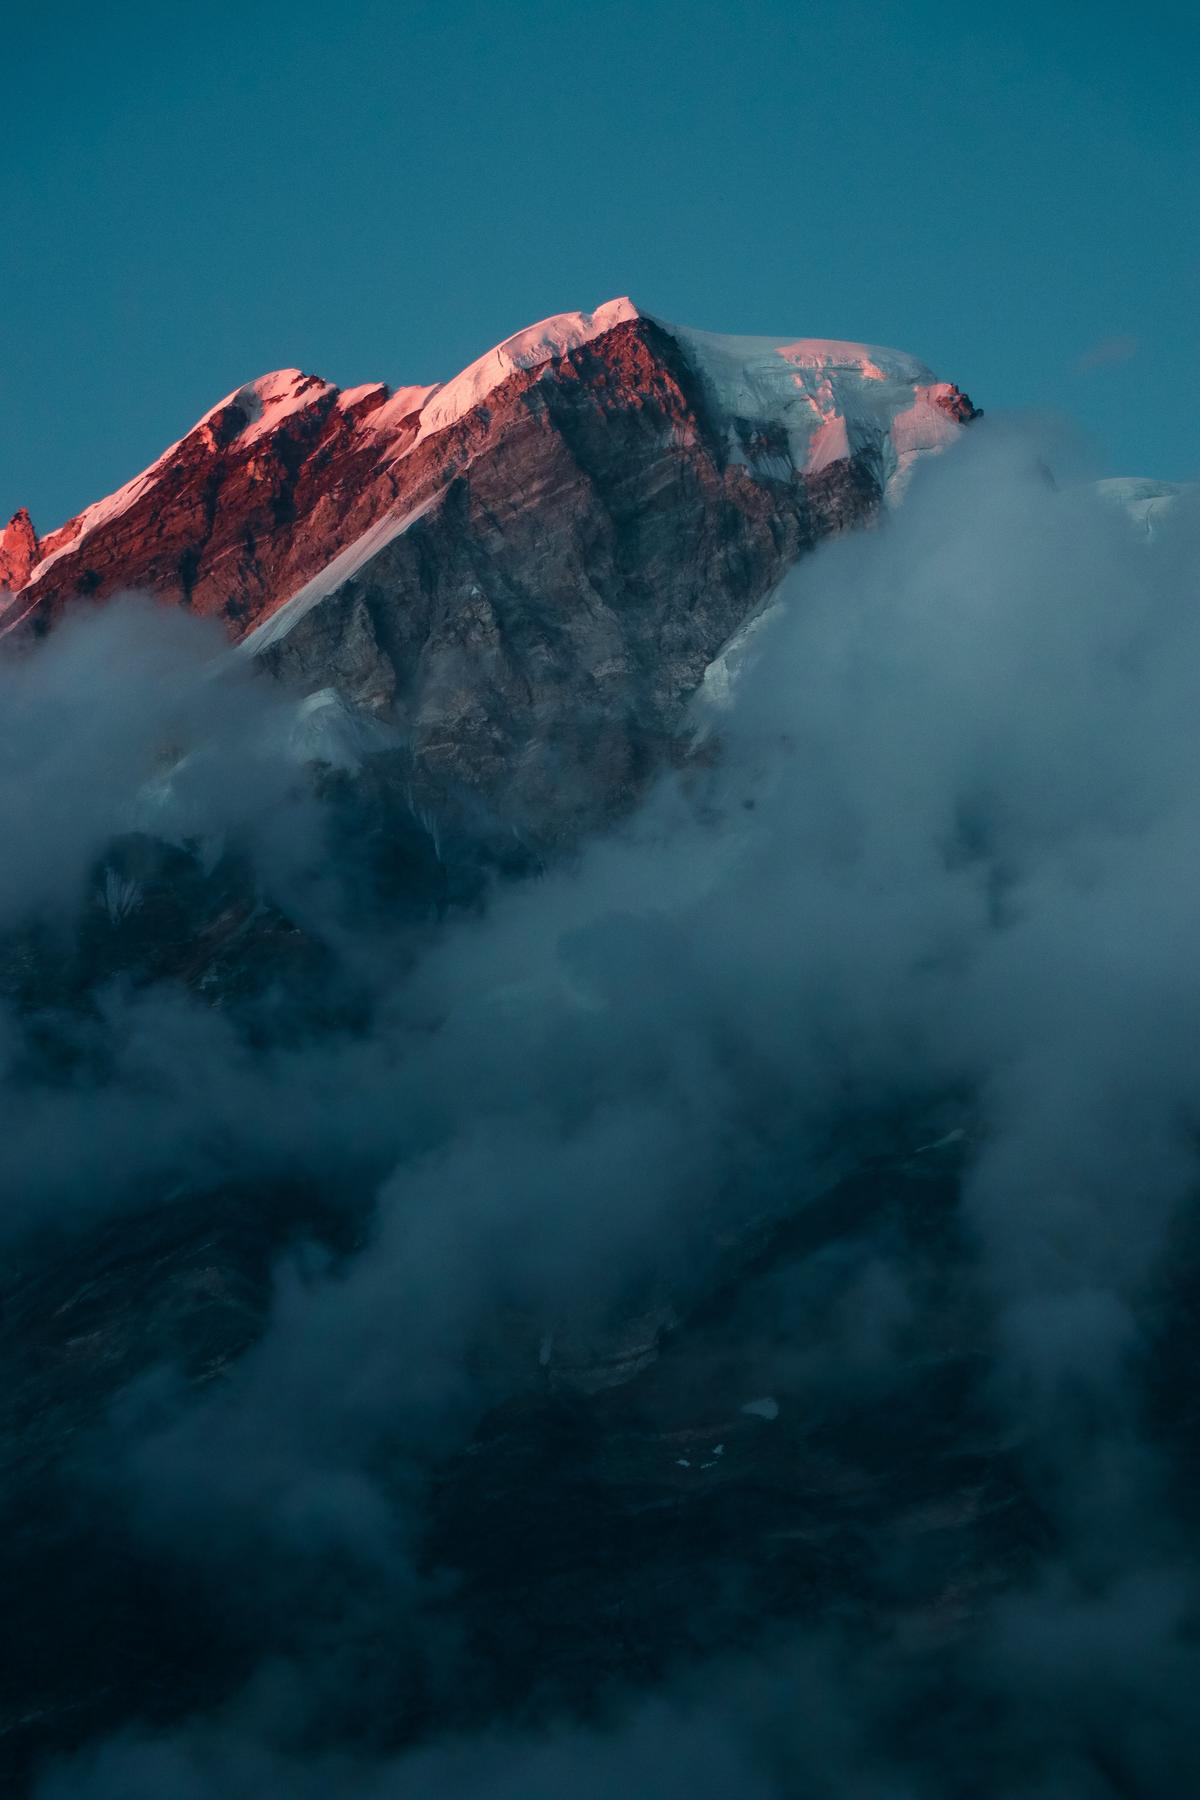 Himalayan mountain appearing with a red tone with blue sky in the background and white clouds in the foreground